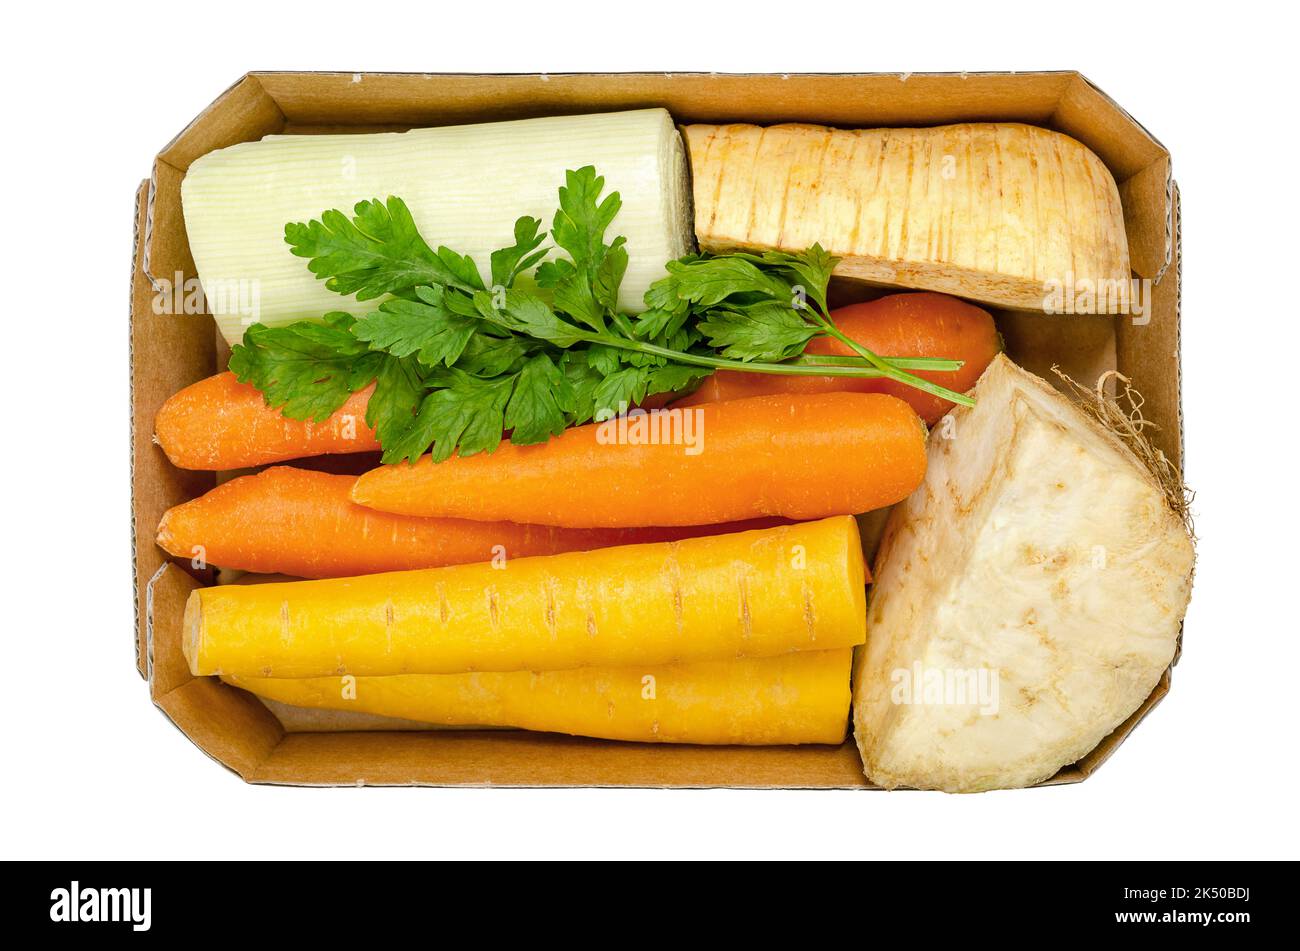 Fresh winter soup pack, uncut and prepacked, in a cardboard tray, from above, isolated over white. Carrots, celery root, parsnip, leek and parsley. Stock Photo